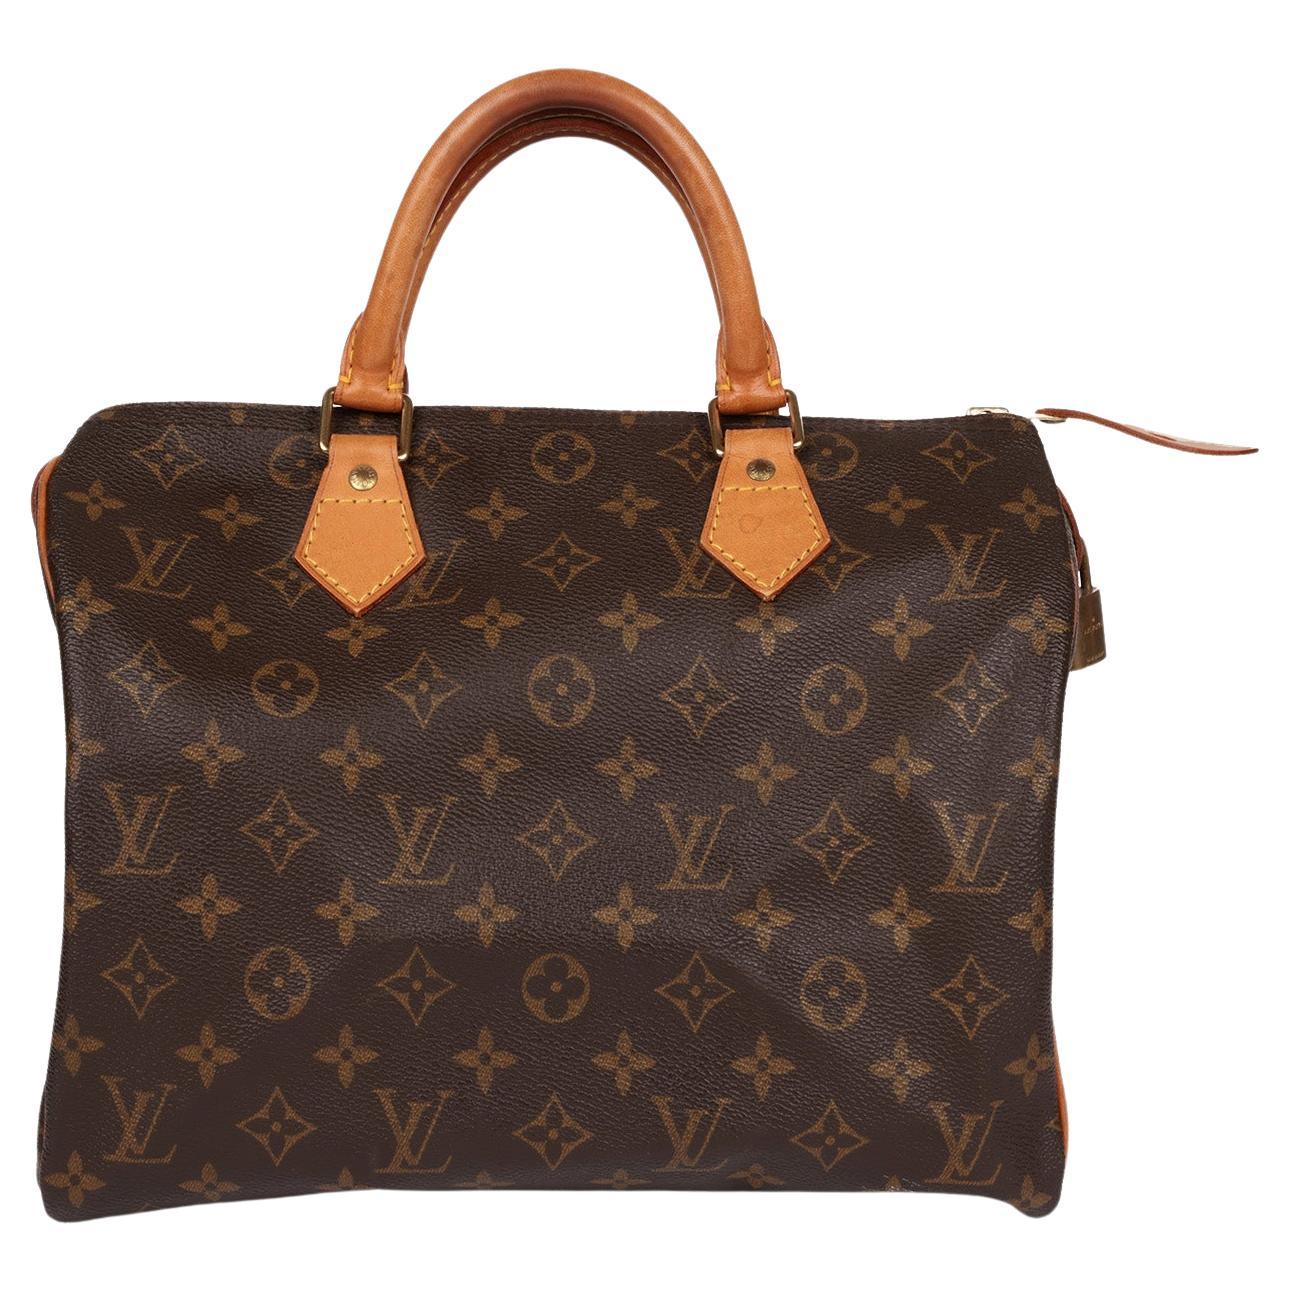 How do I get an even patina on Louis Vuitton?